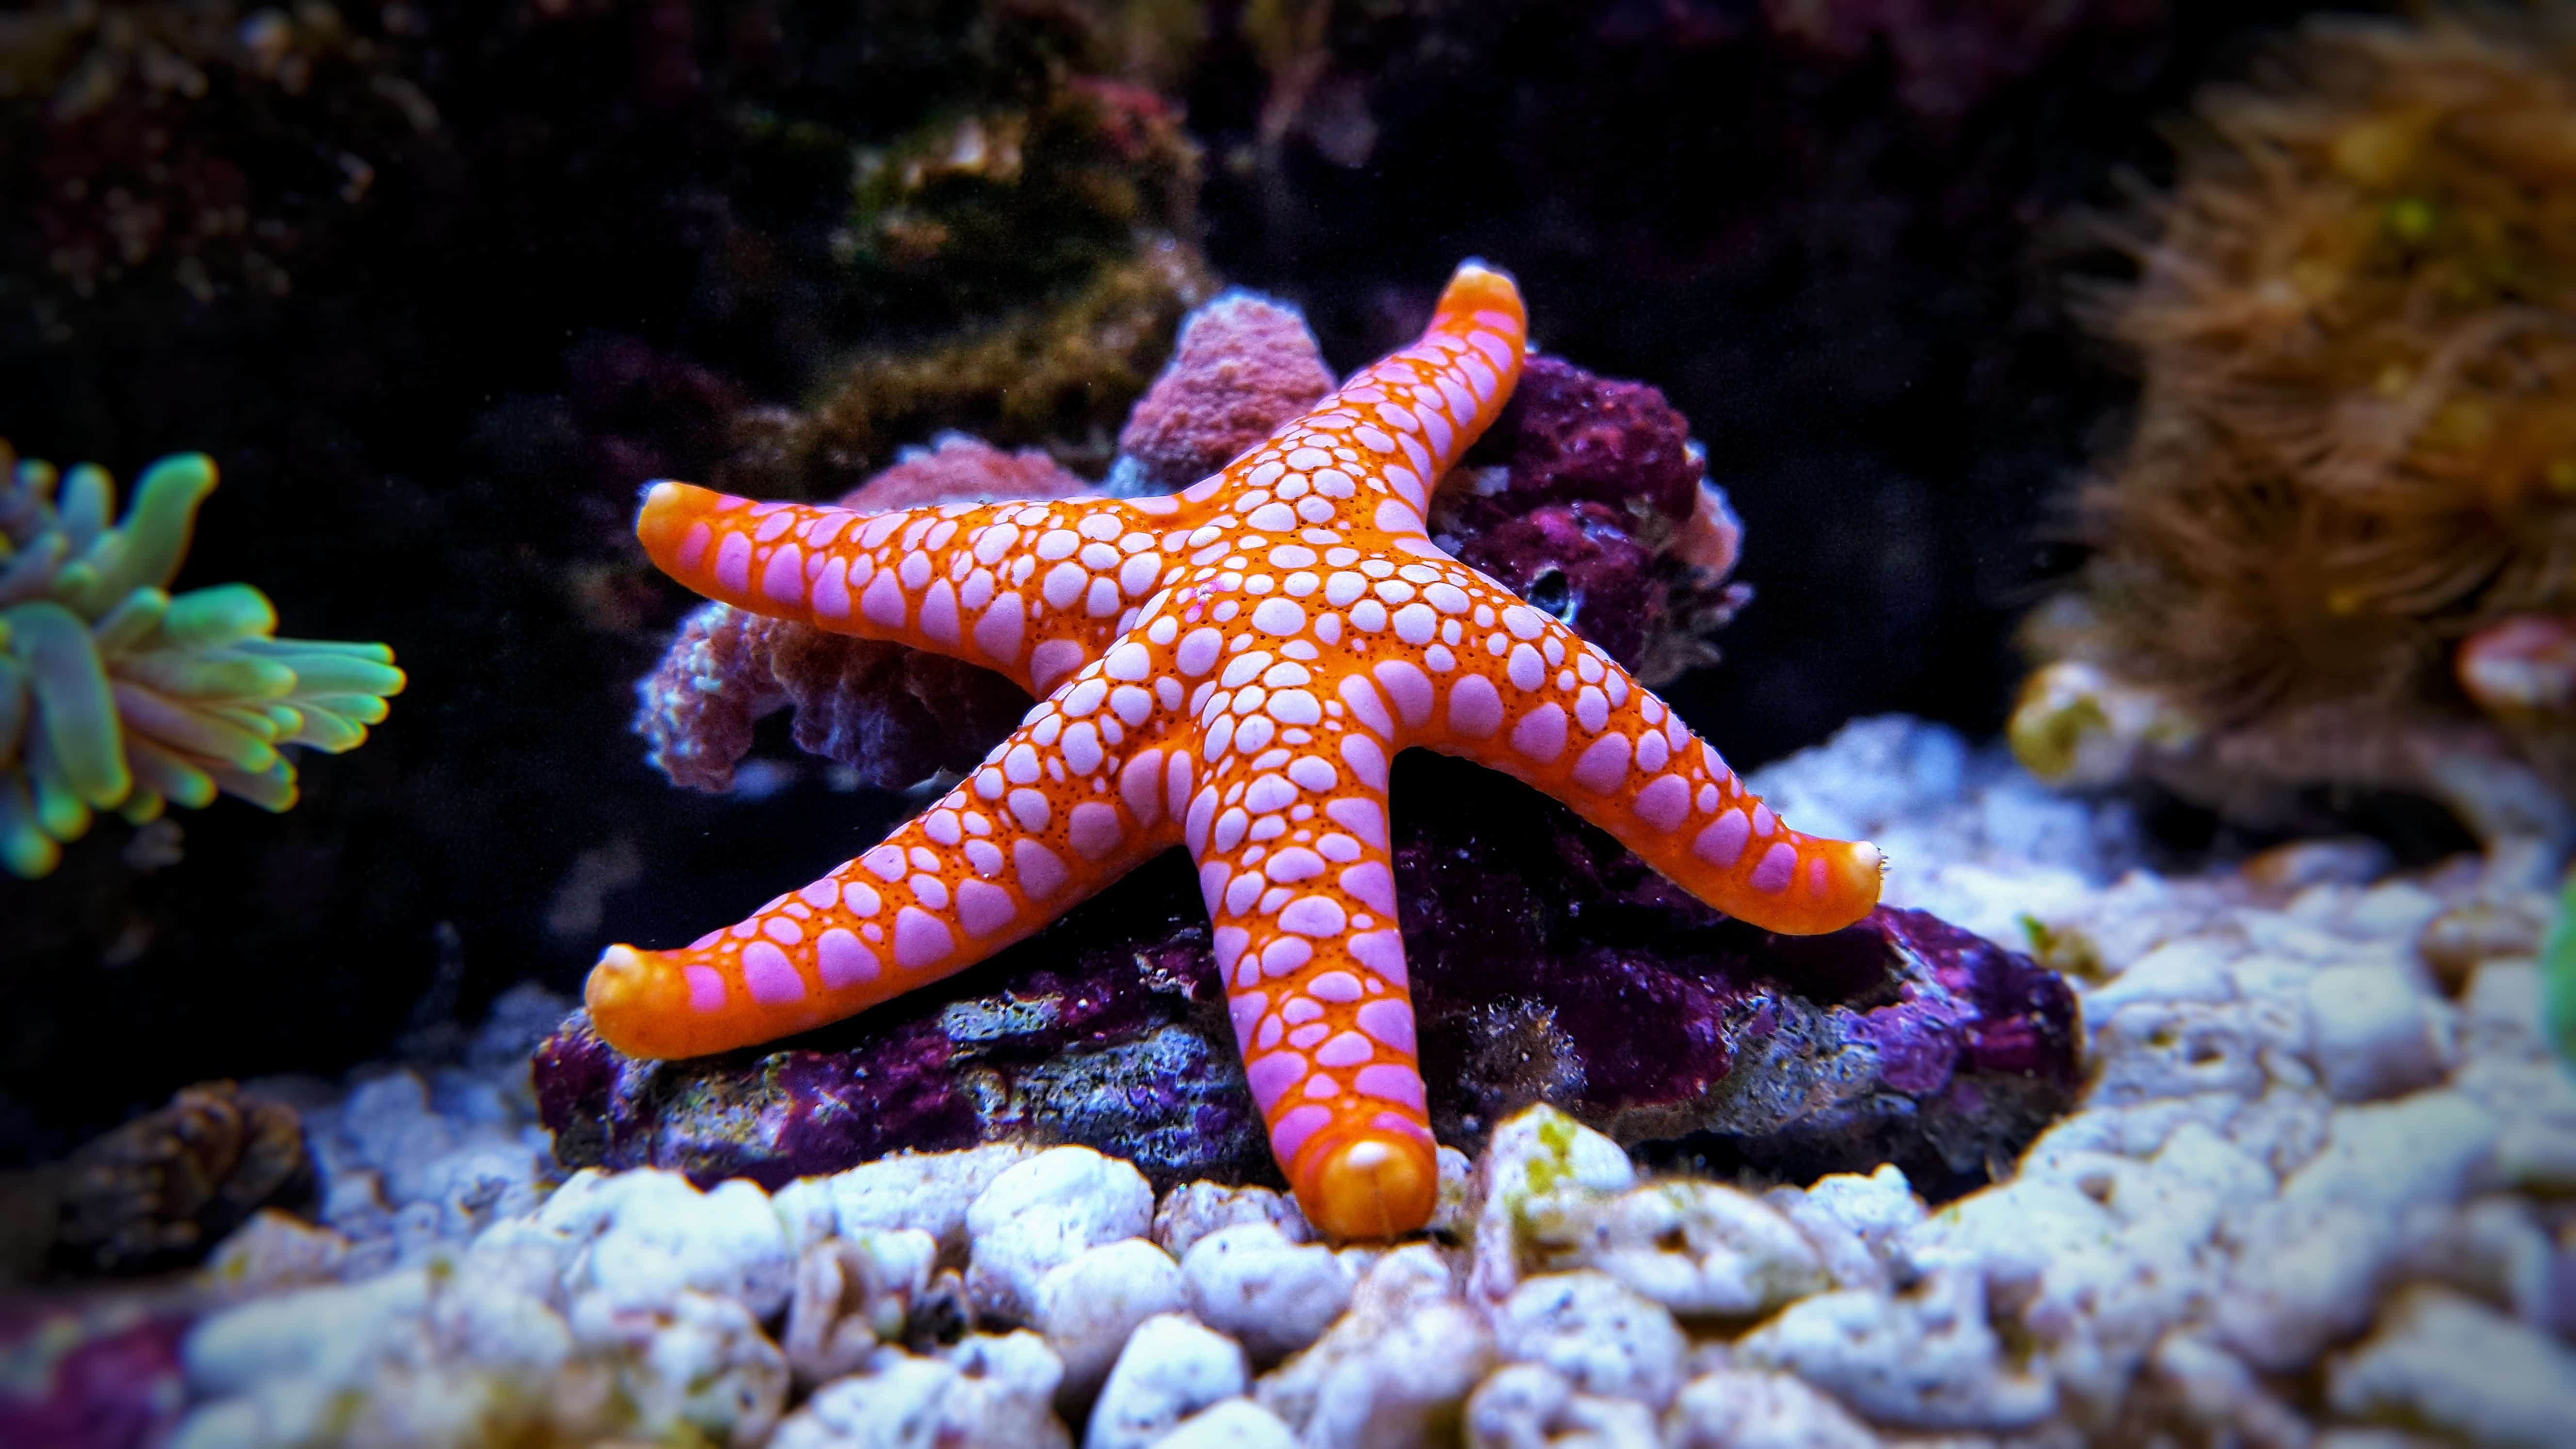 40 Quirky Starfish Facts That May Surprise You - Facts.net